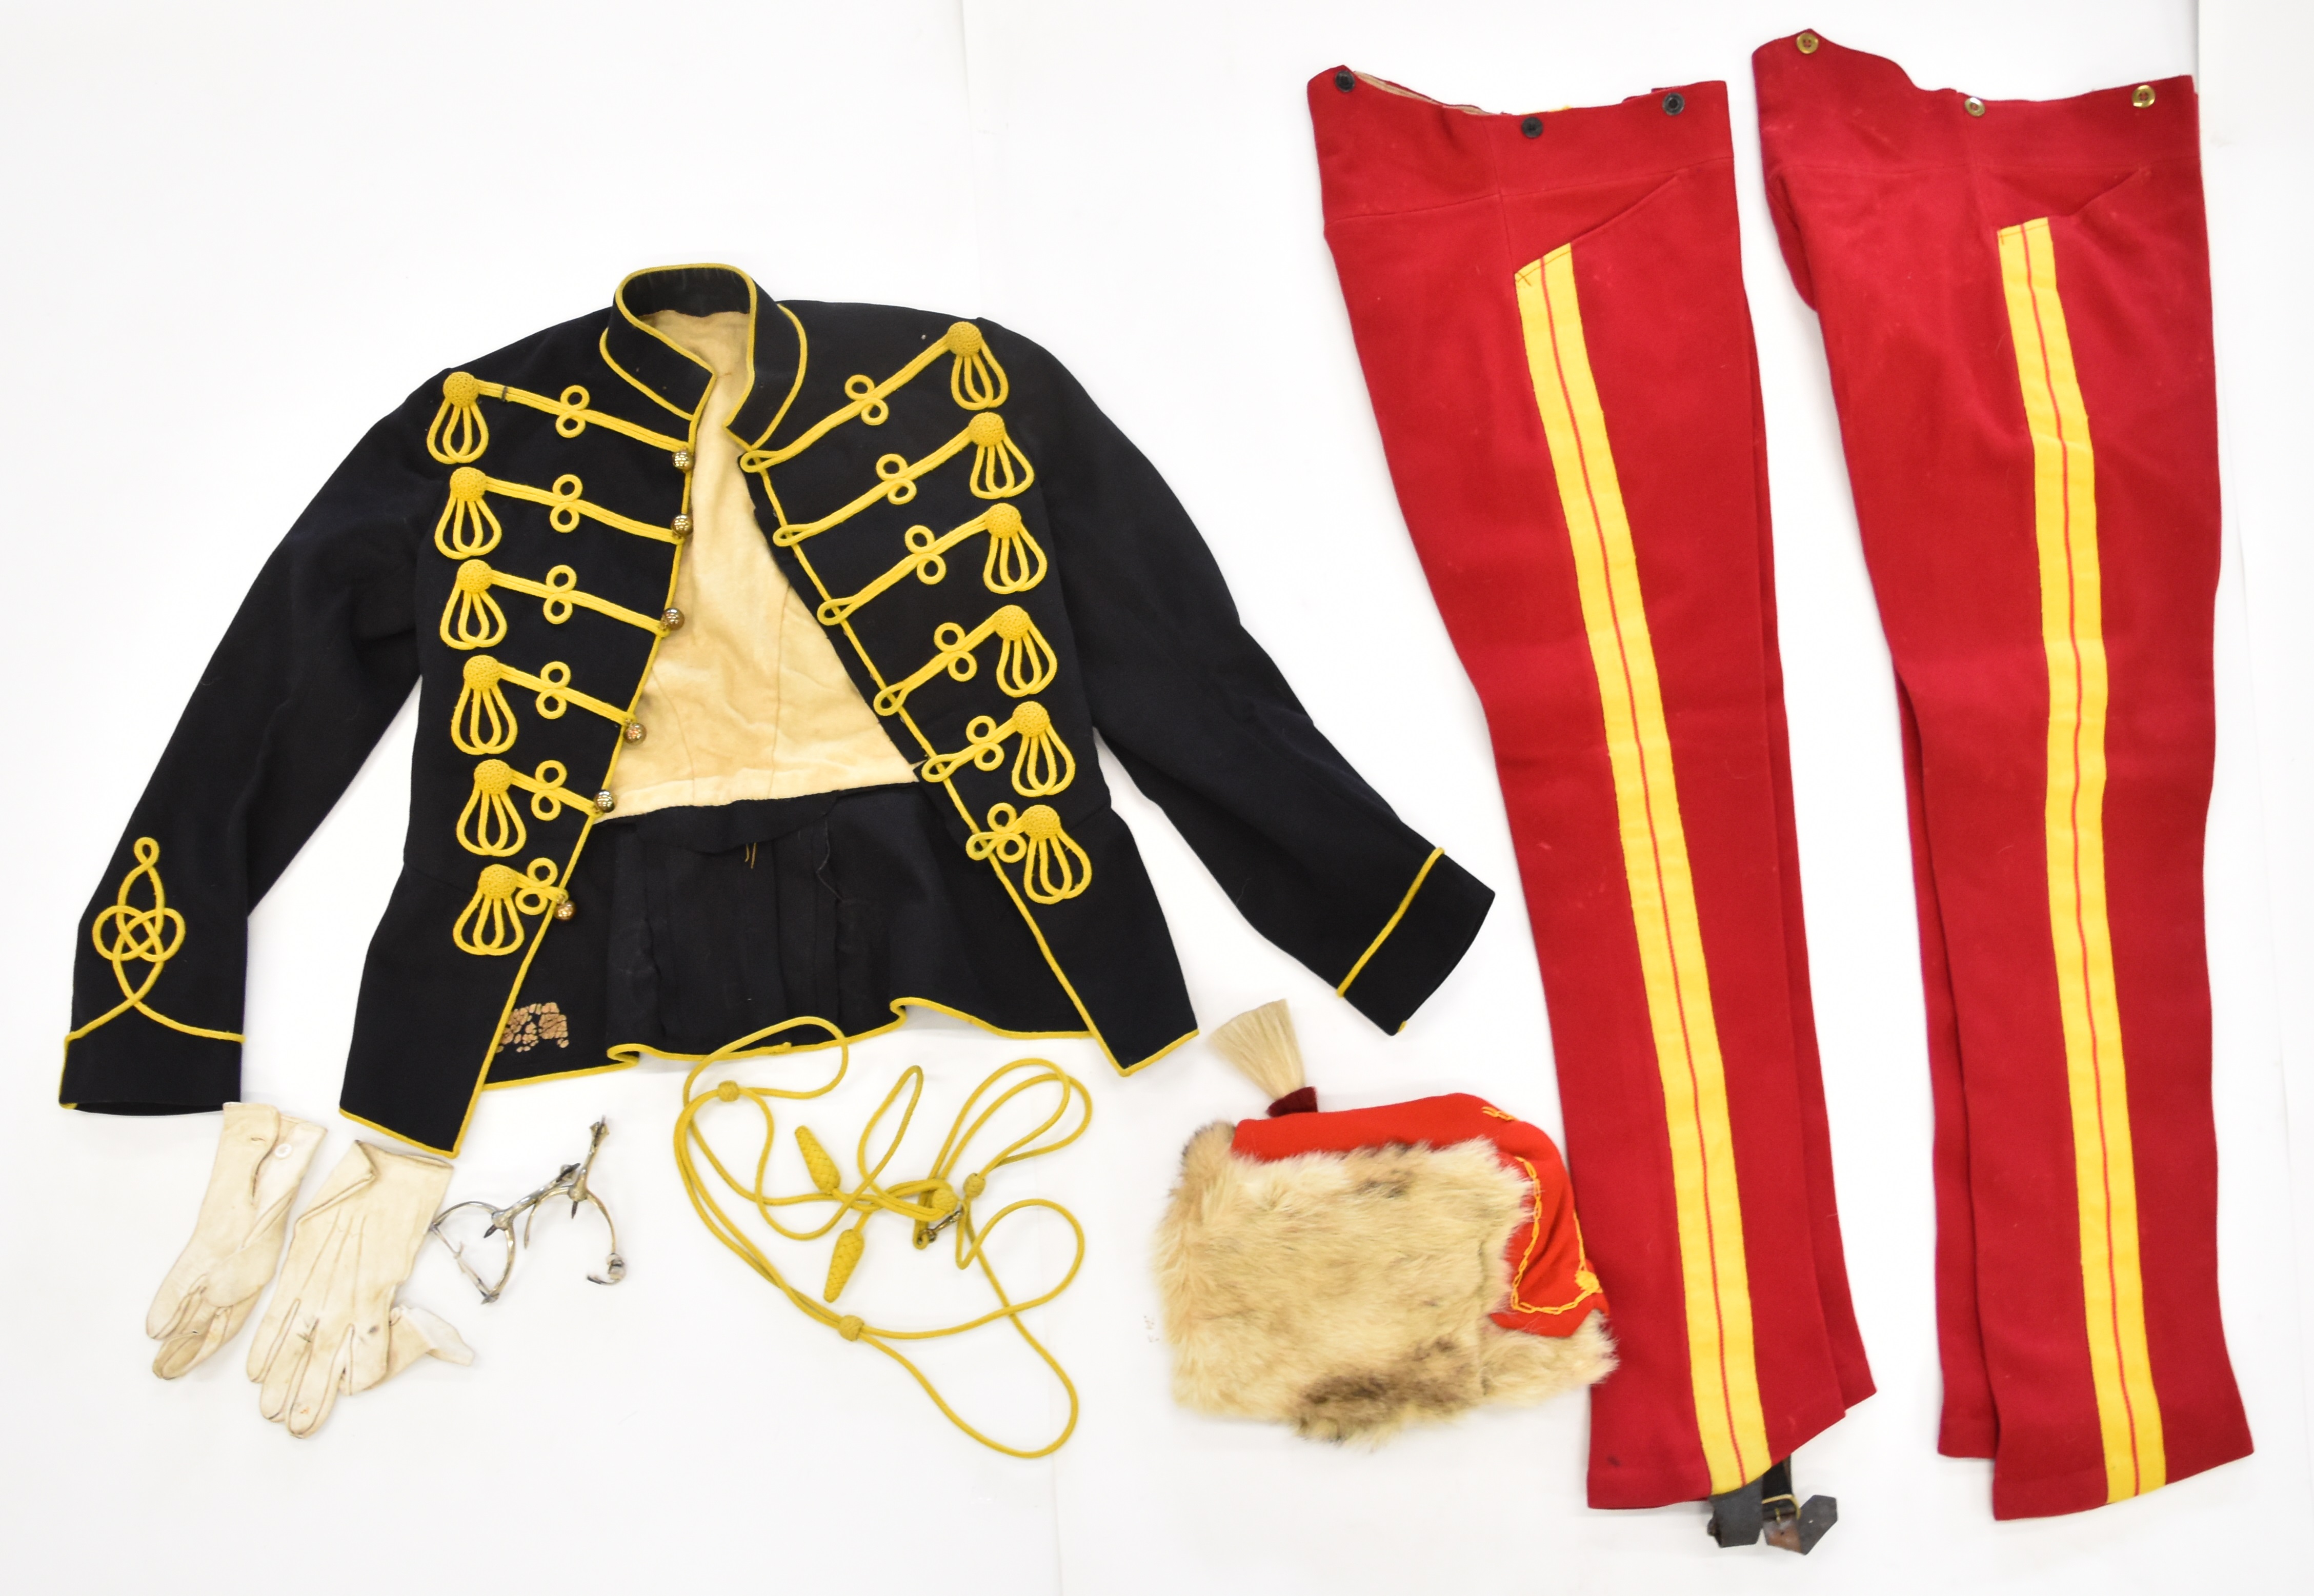 British Army 11th Hussars (Prince Albert's Own) uniform comprising two pairs of breeches, both